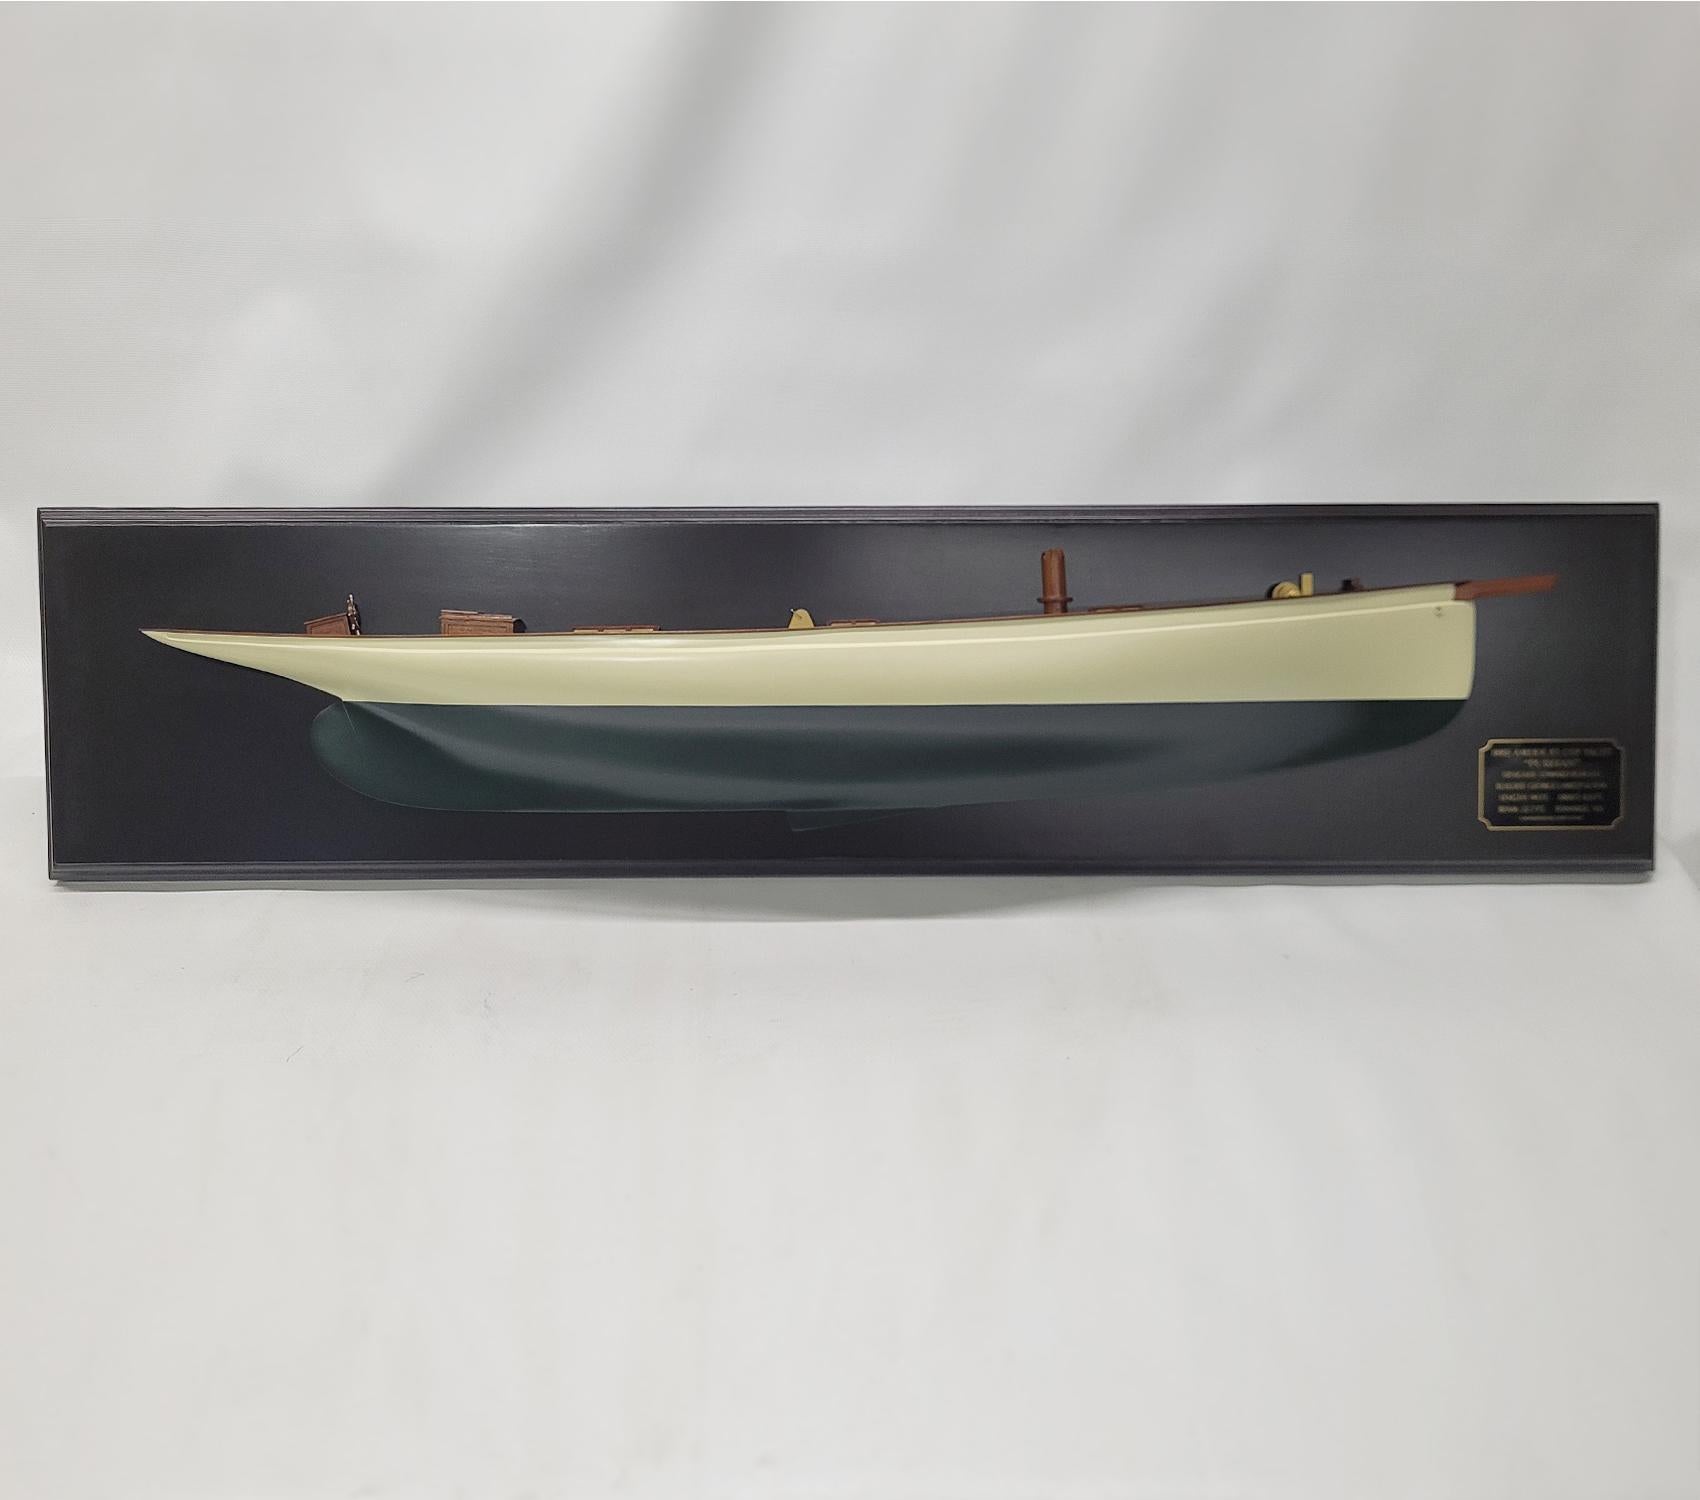 Carved woo half model of the 1885 America's Cup Yacht Puritan. The hull is painted white above the waterline and green below. There is a planked wood. mahogany deck, hatched, skylights, wheel box, companionway, etc.. The hull is mounted to a